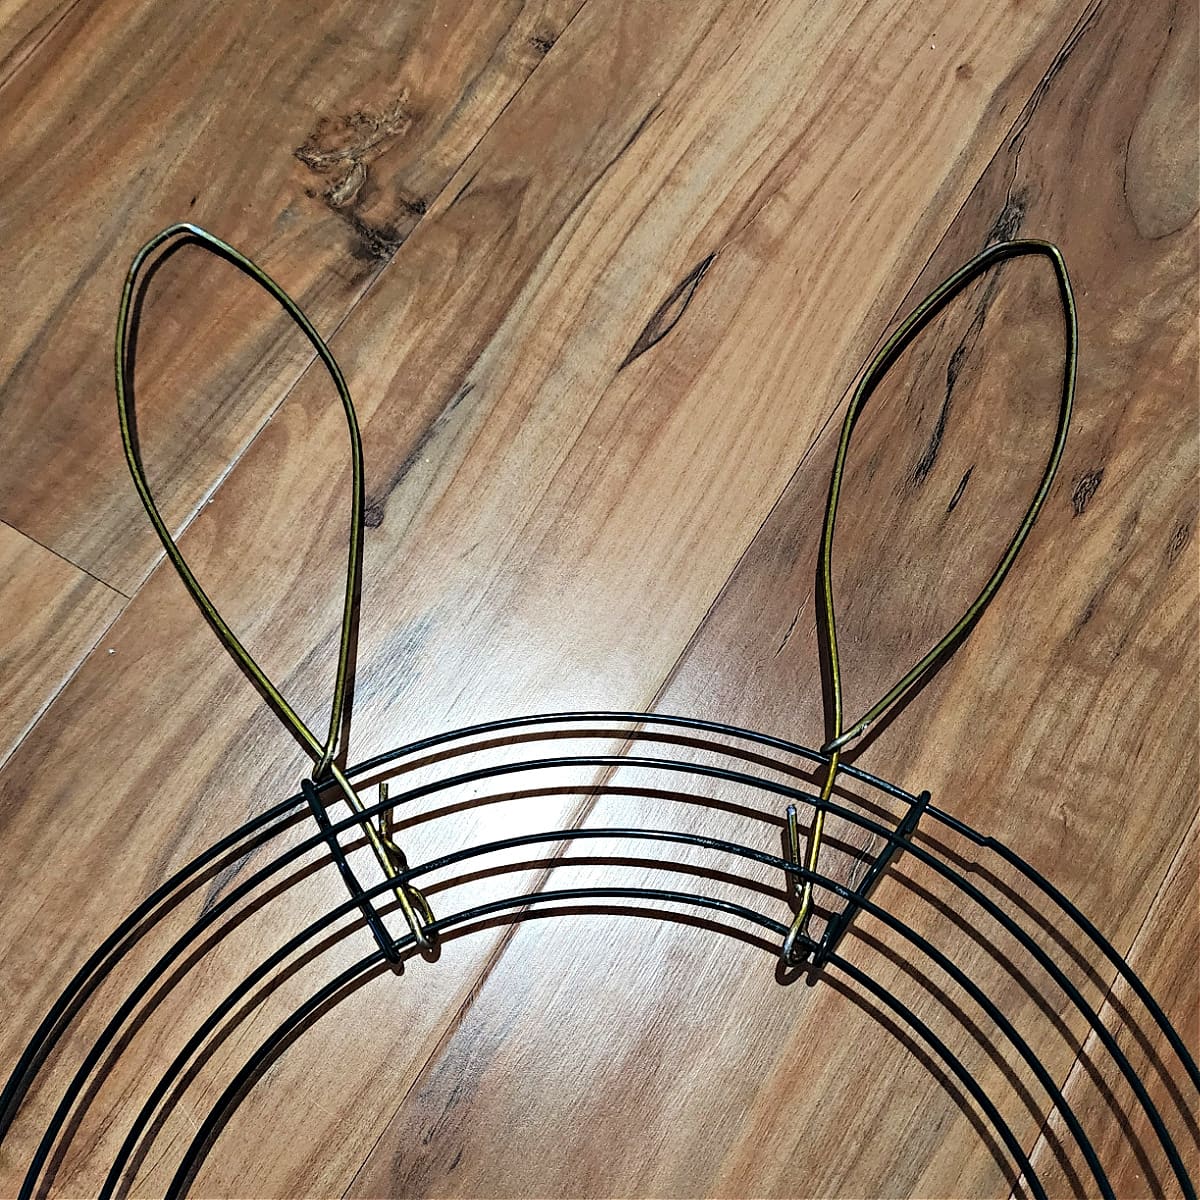 Both coat hanger bunny ears attached to round wreath frame.